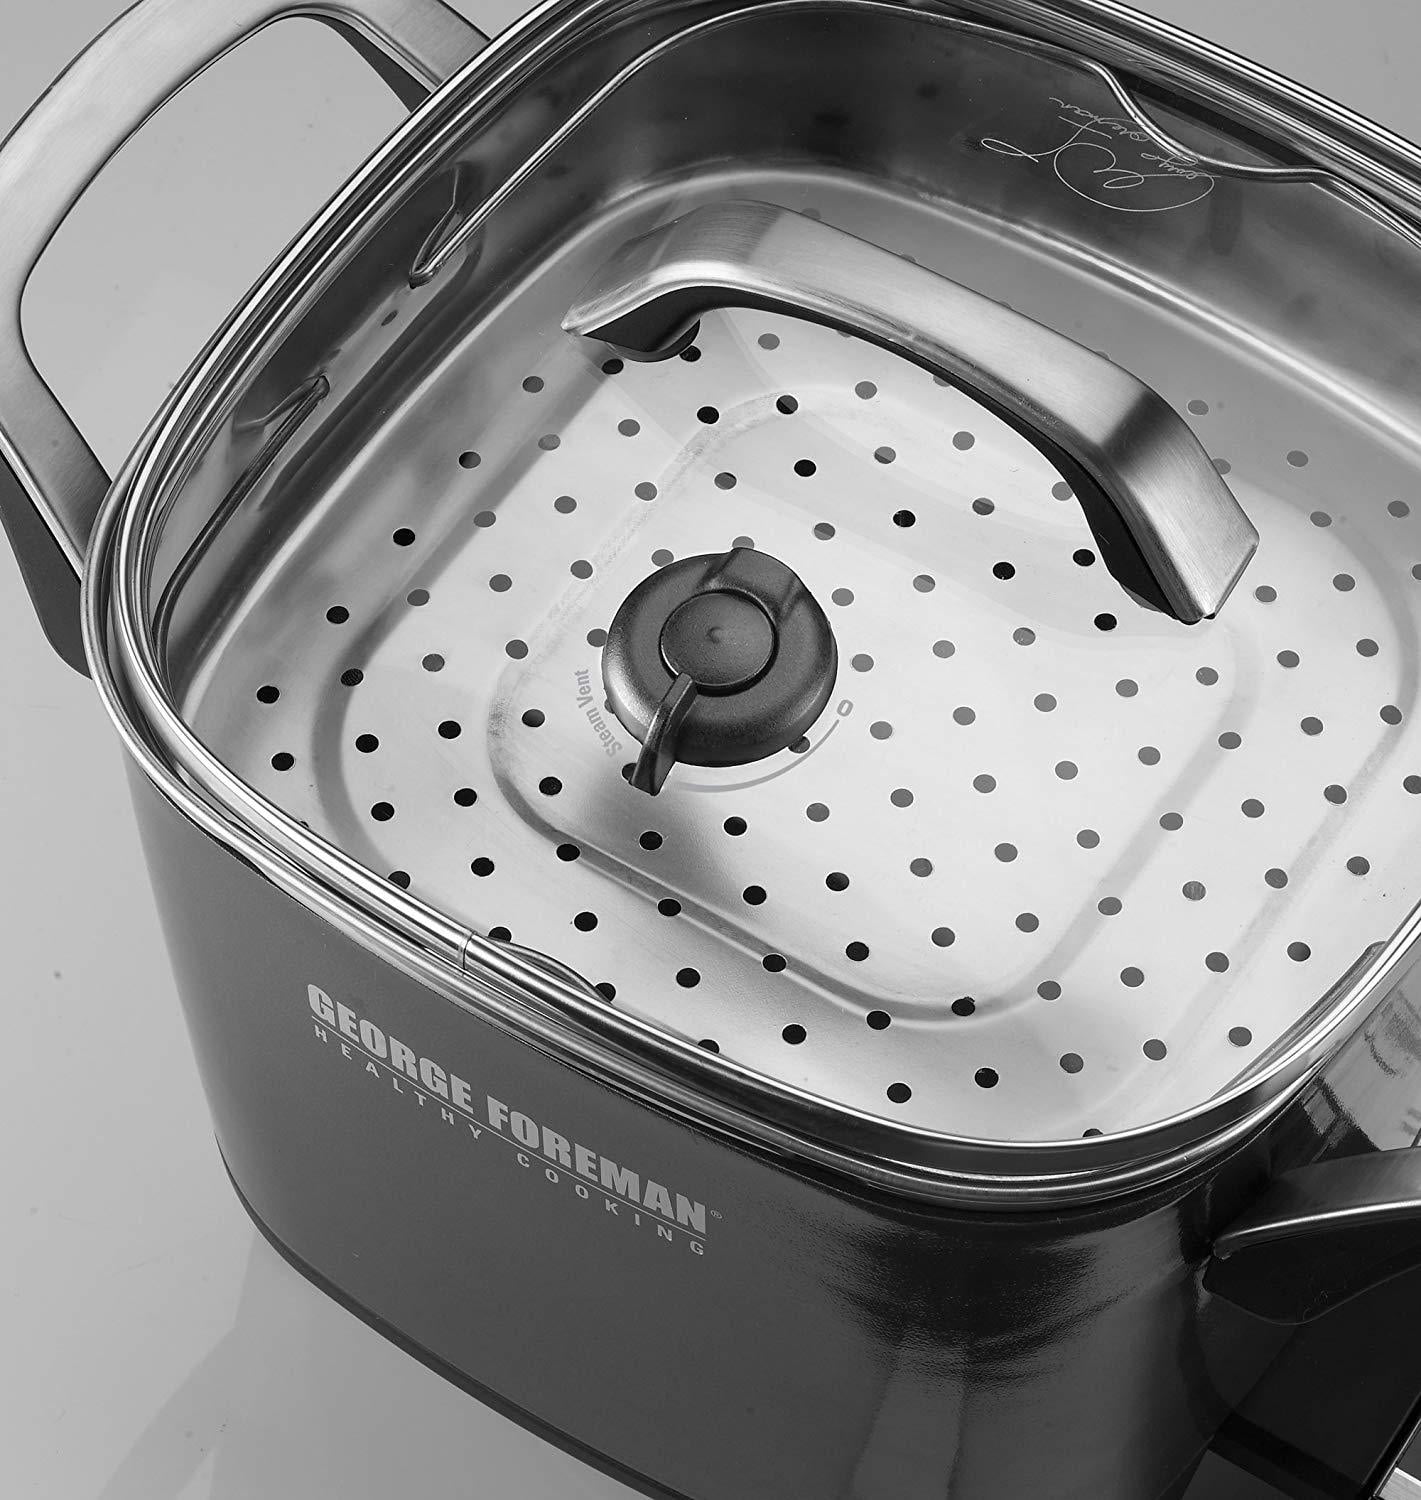 REVIEW: George Foreman Multicooker